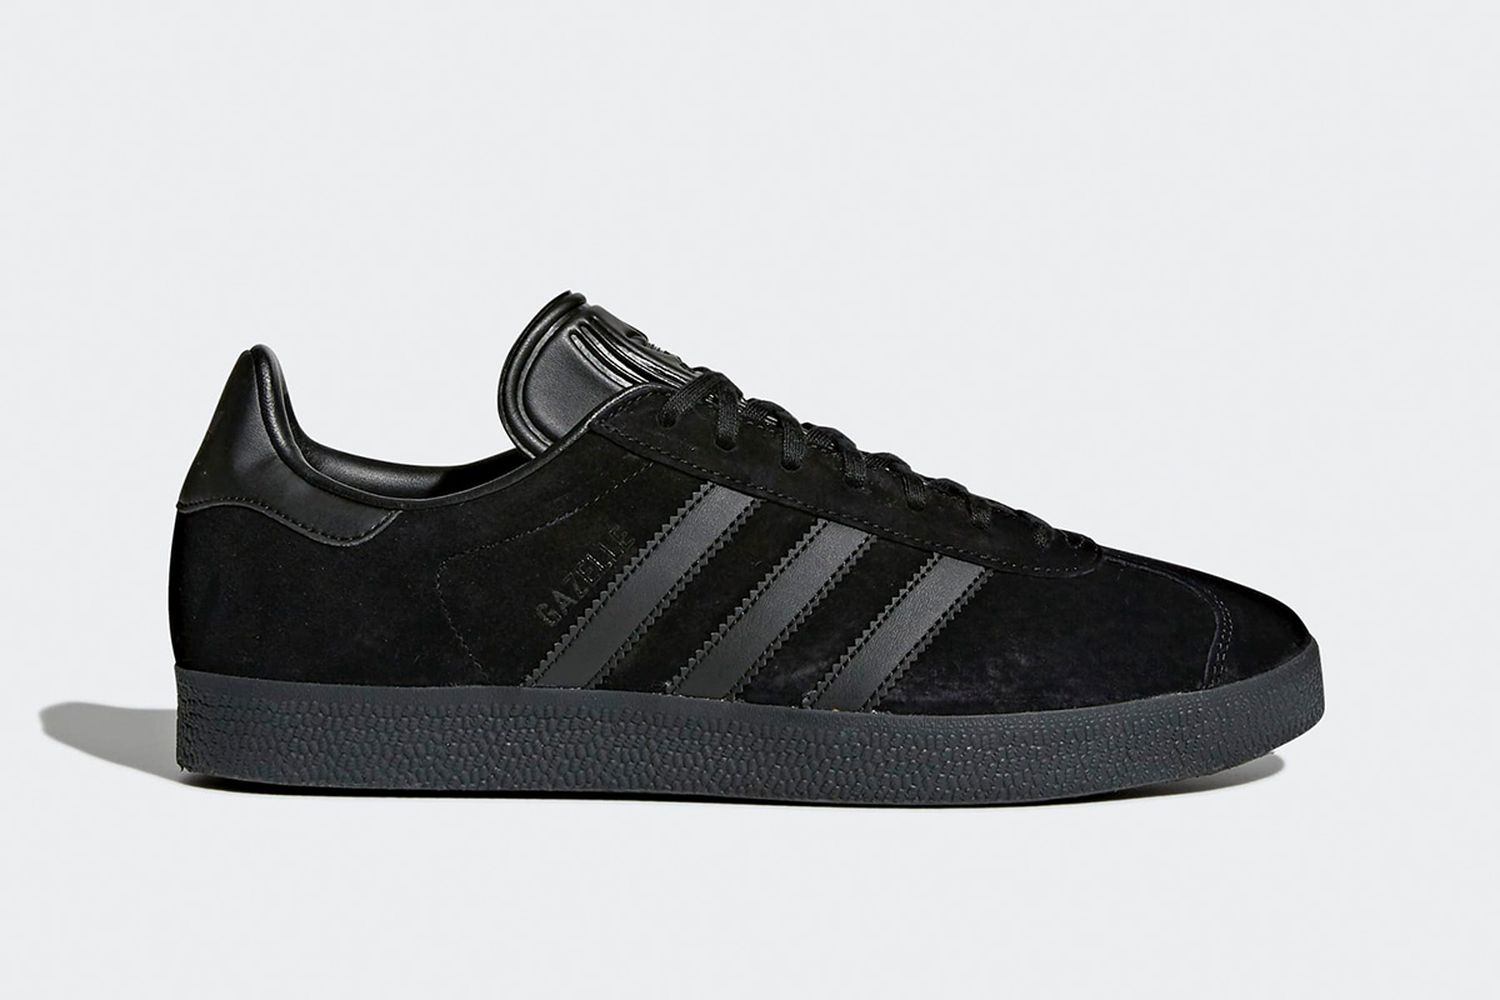 9 of Classic adidas Sneakers That Every Needs